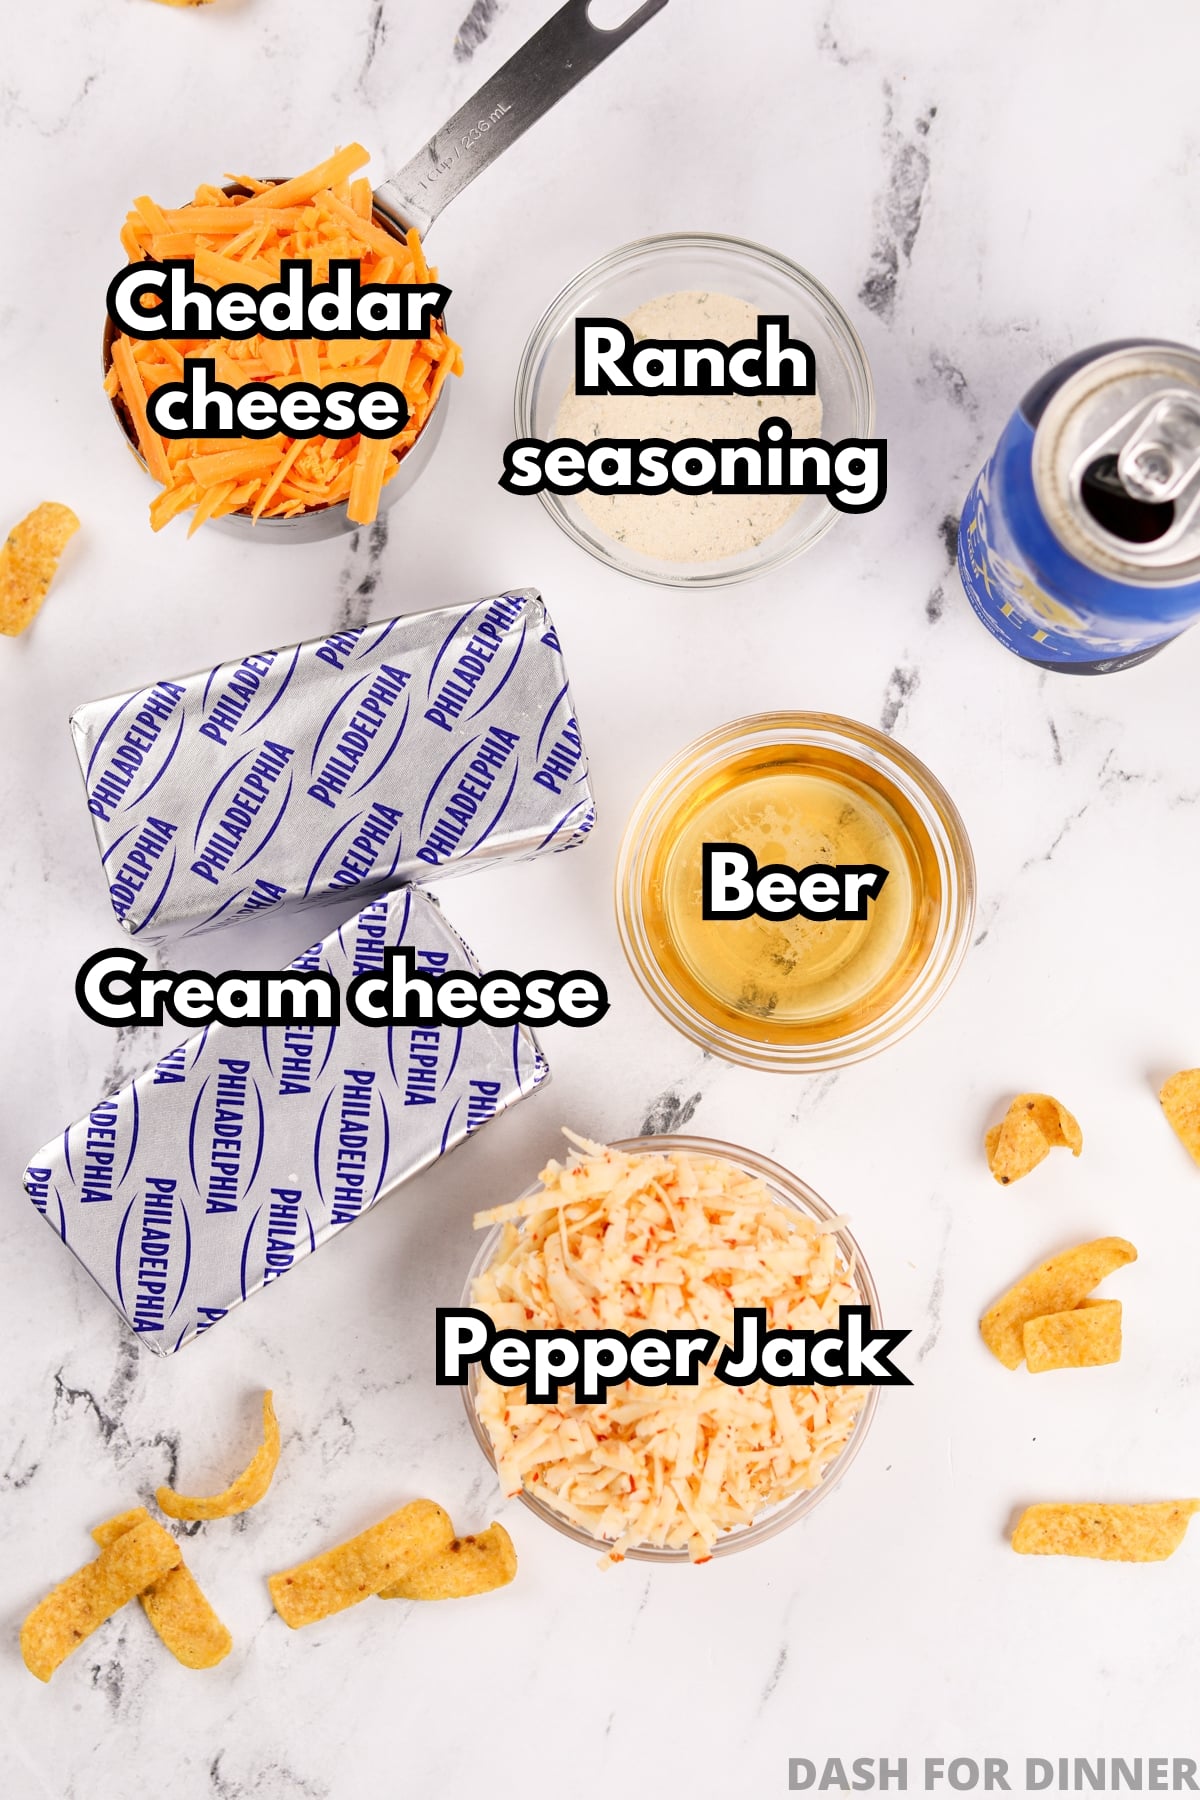 The ingredients needed to make beer dip, including cream cheese, beer, pepper jack cheese, cheddar cheese, and ranch seasoning.